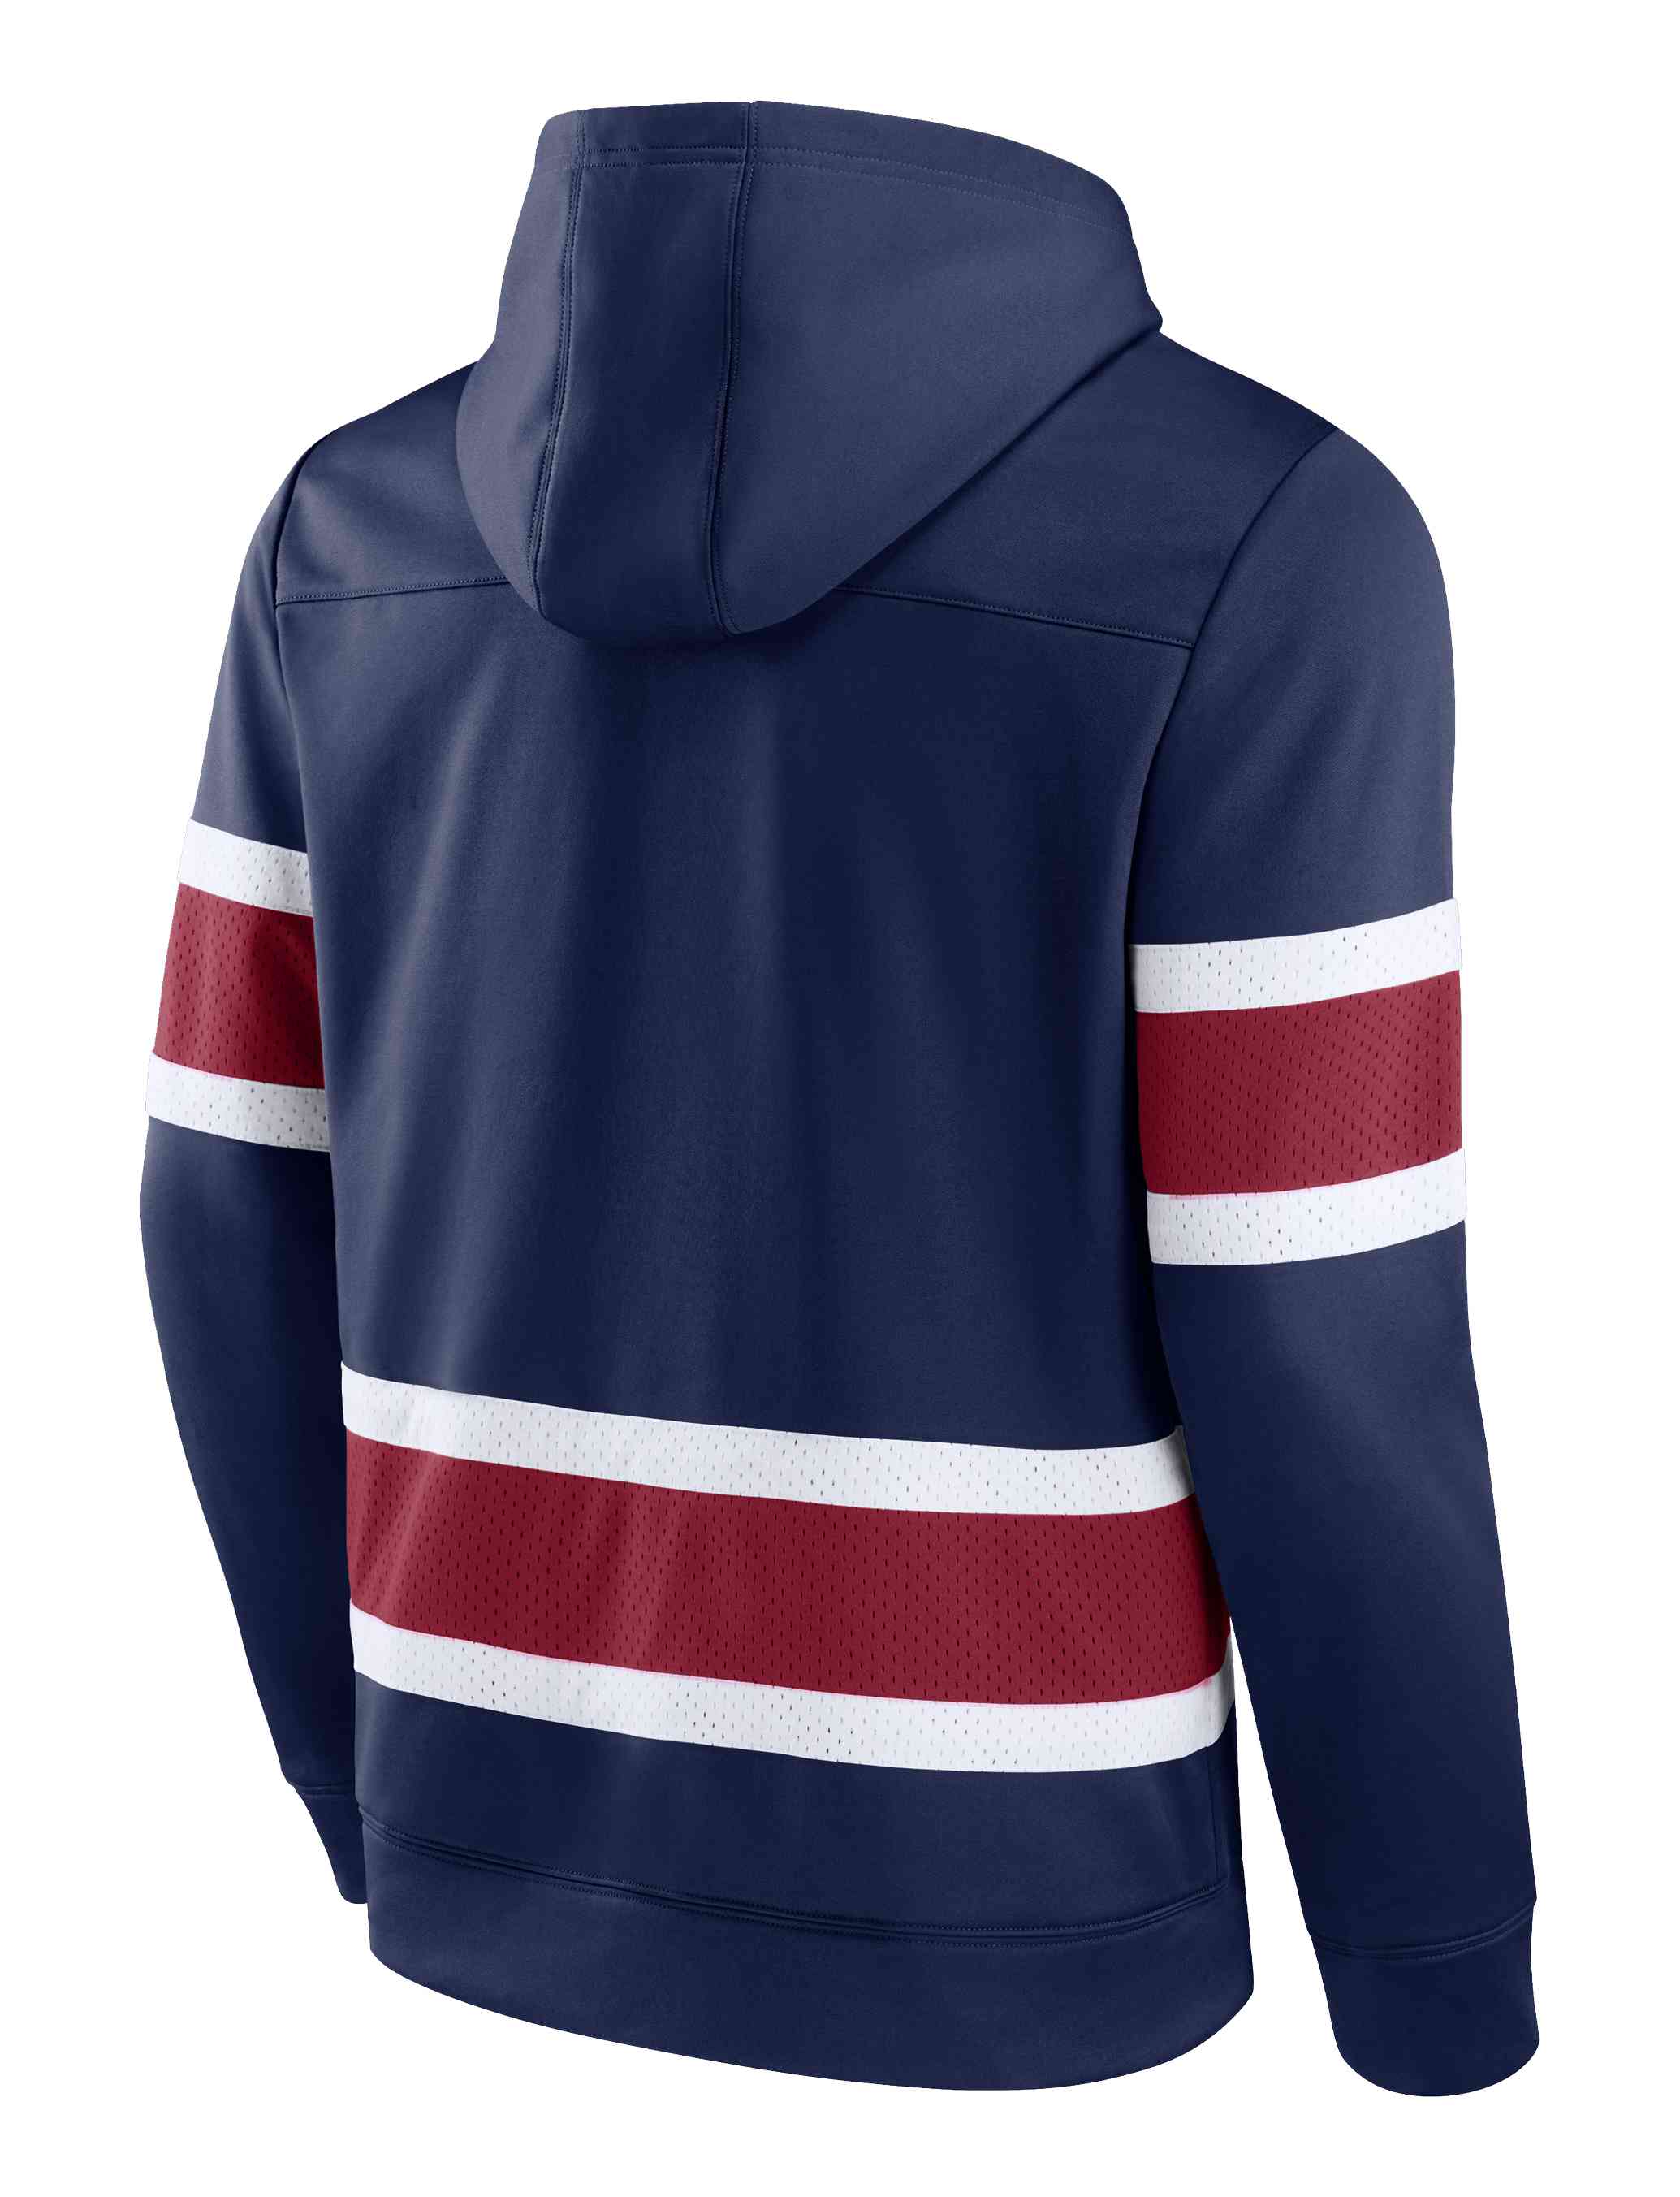 Fanatics - NHL Montreal Canadiens Iconic Exclusive Pullover Hoodie